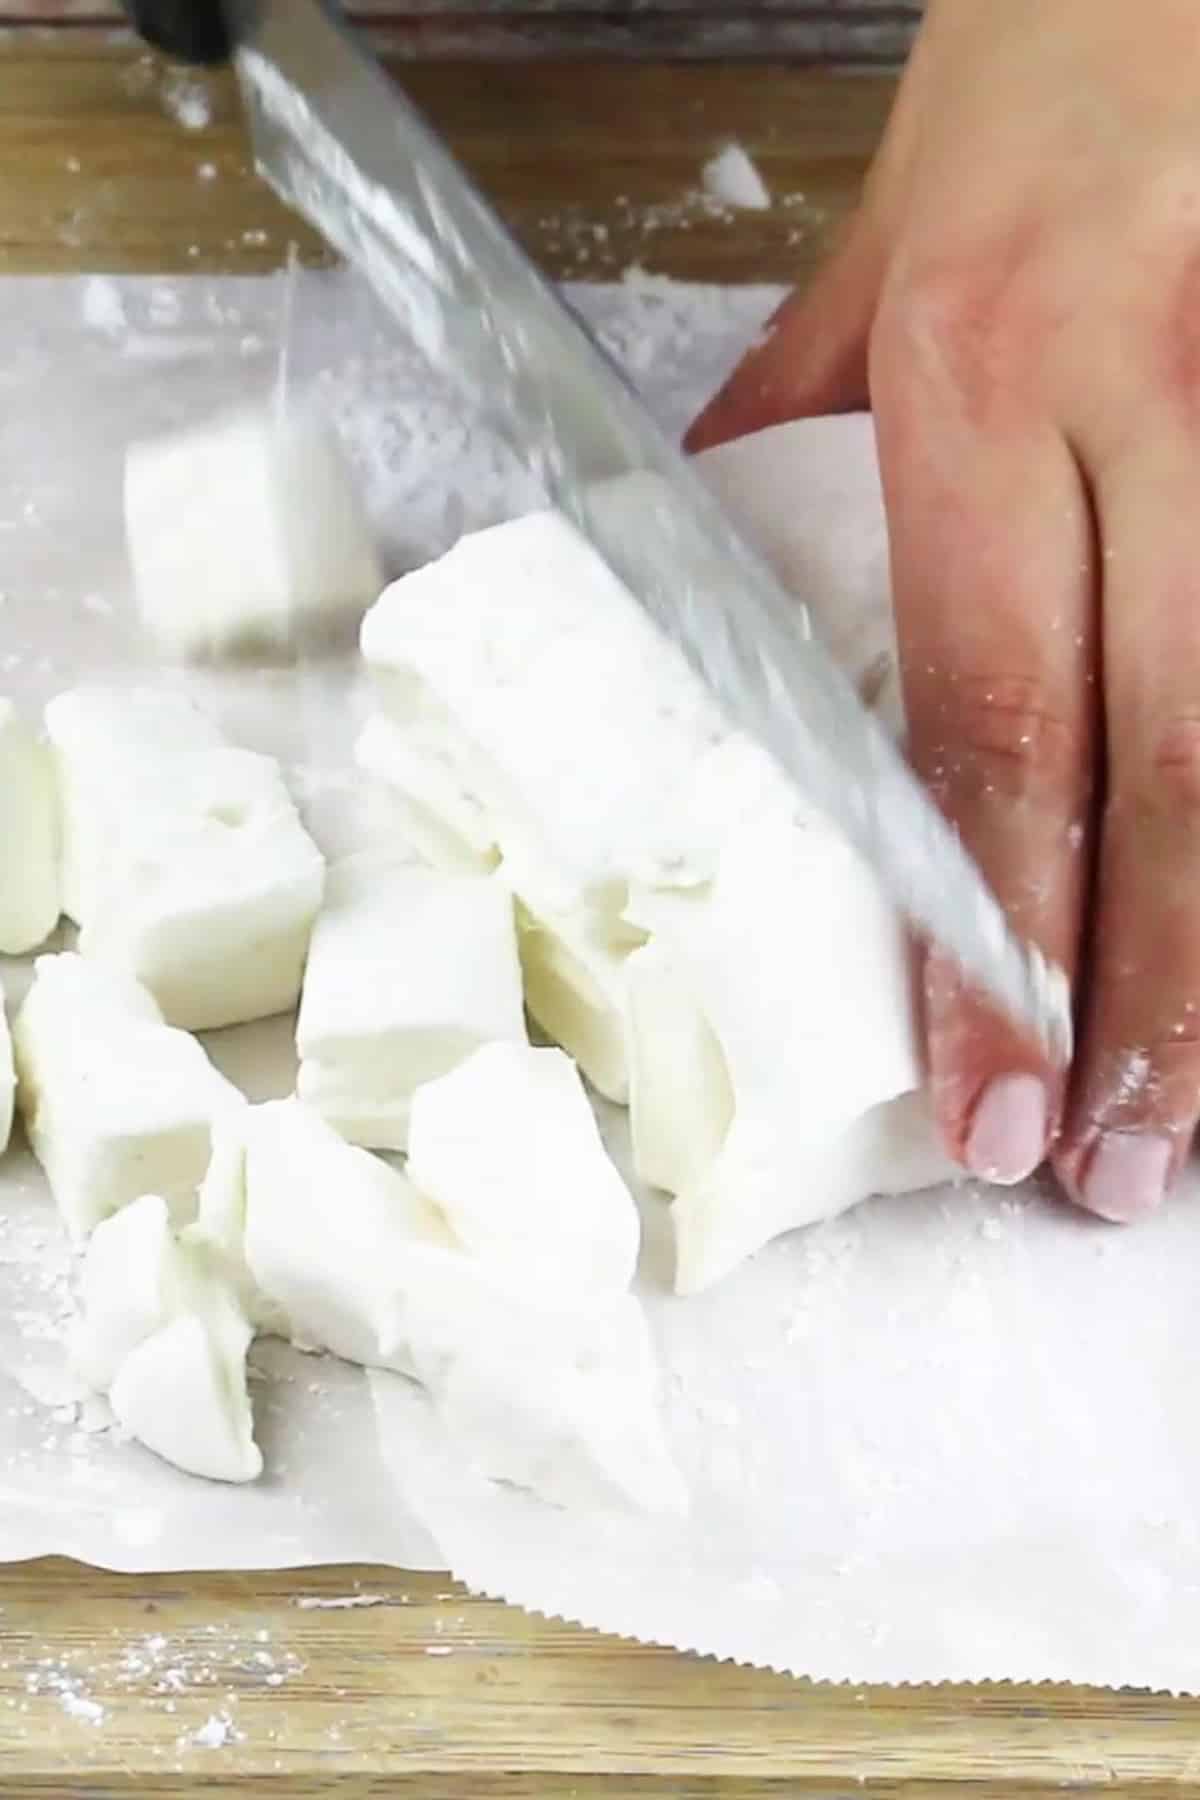 homemade marshmallows cut into small pieces with a chef's knife.